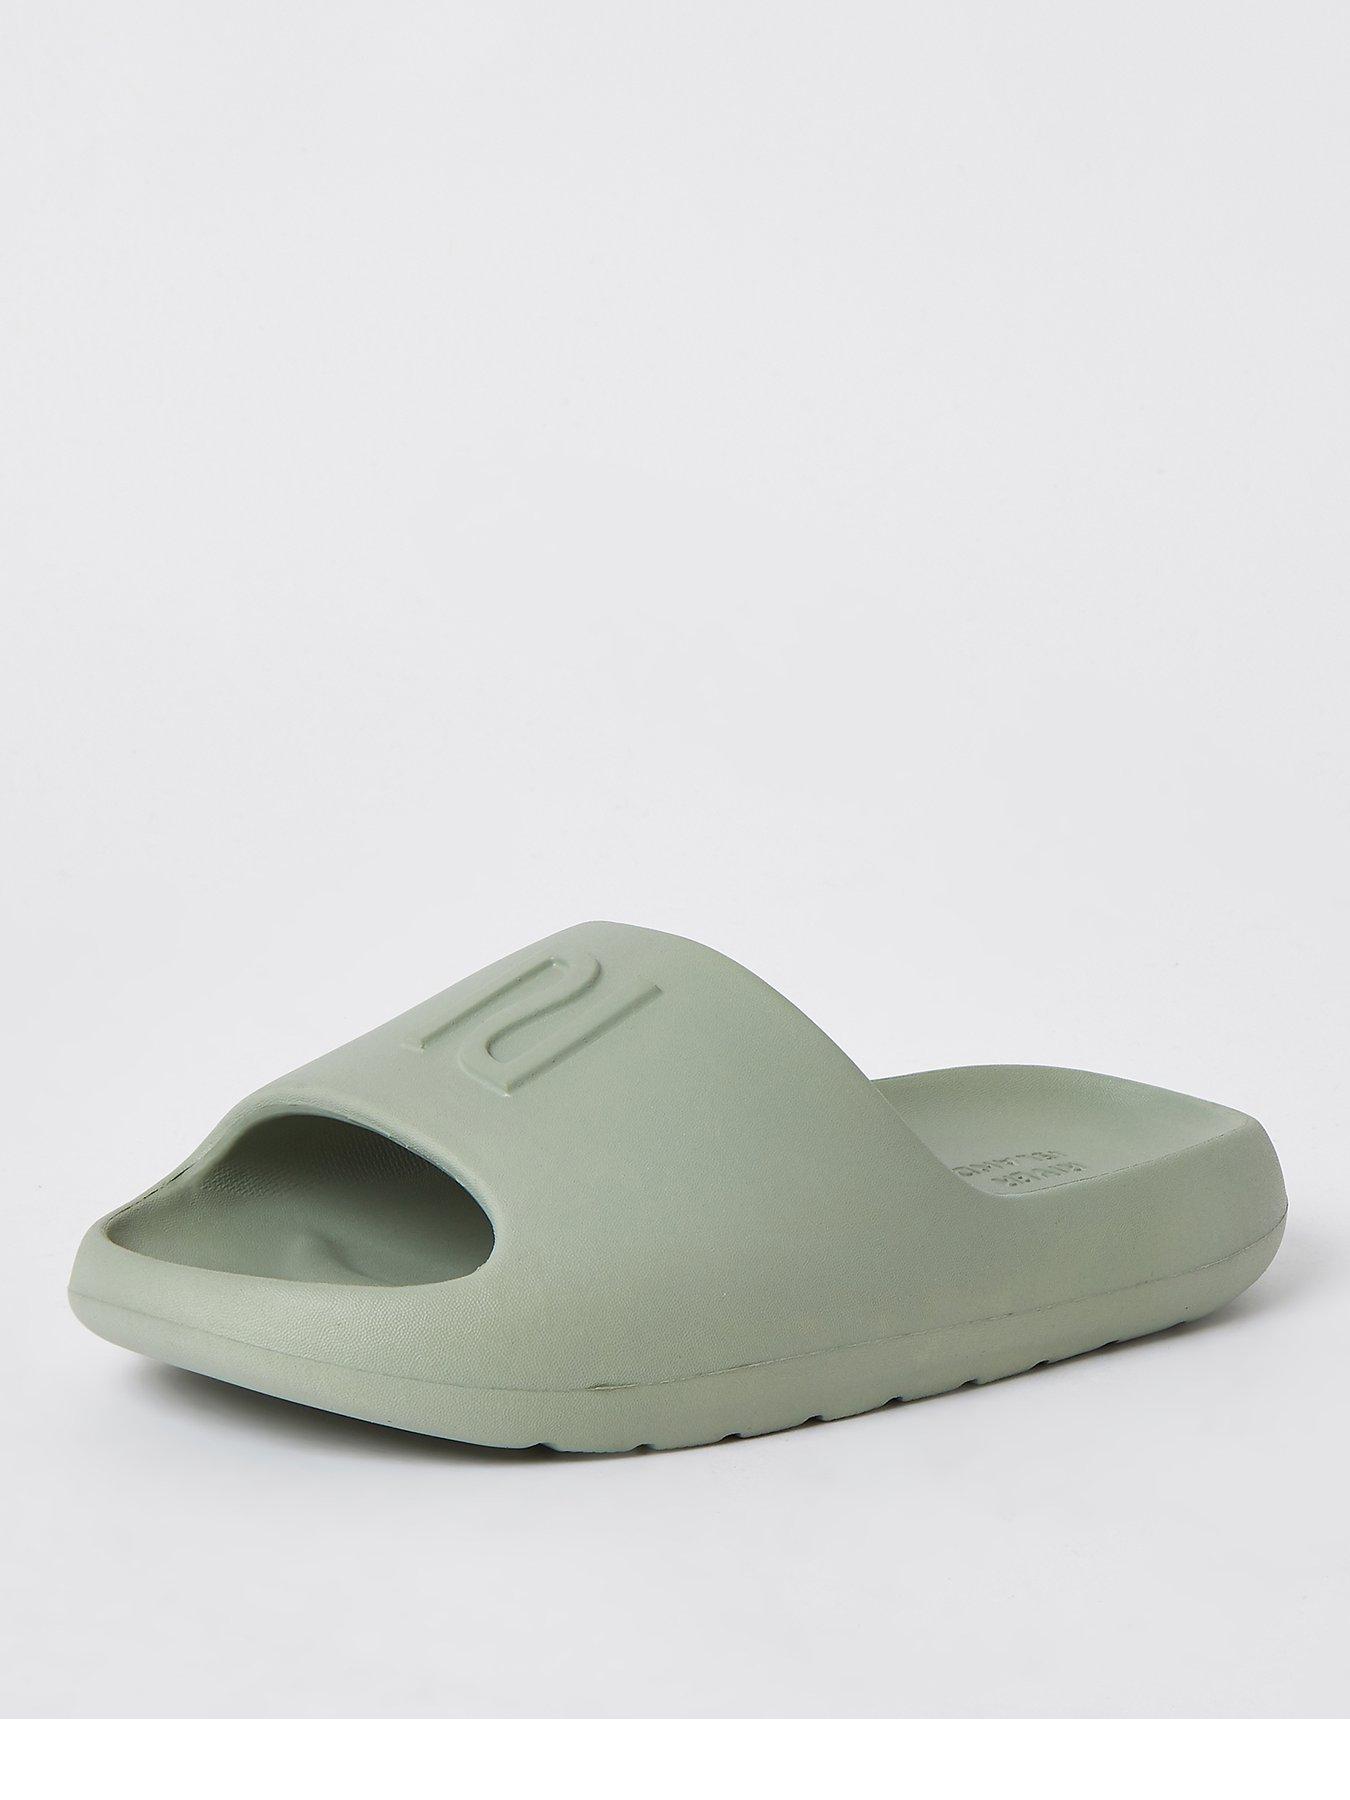 river island green shoes